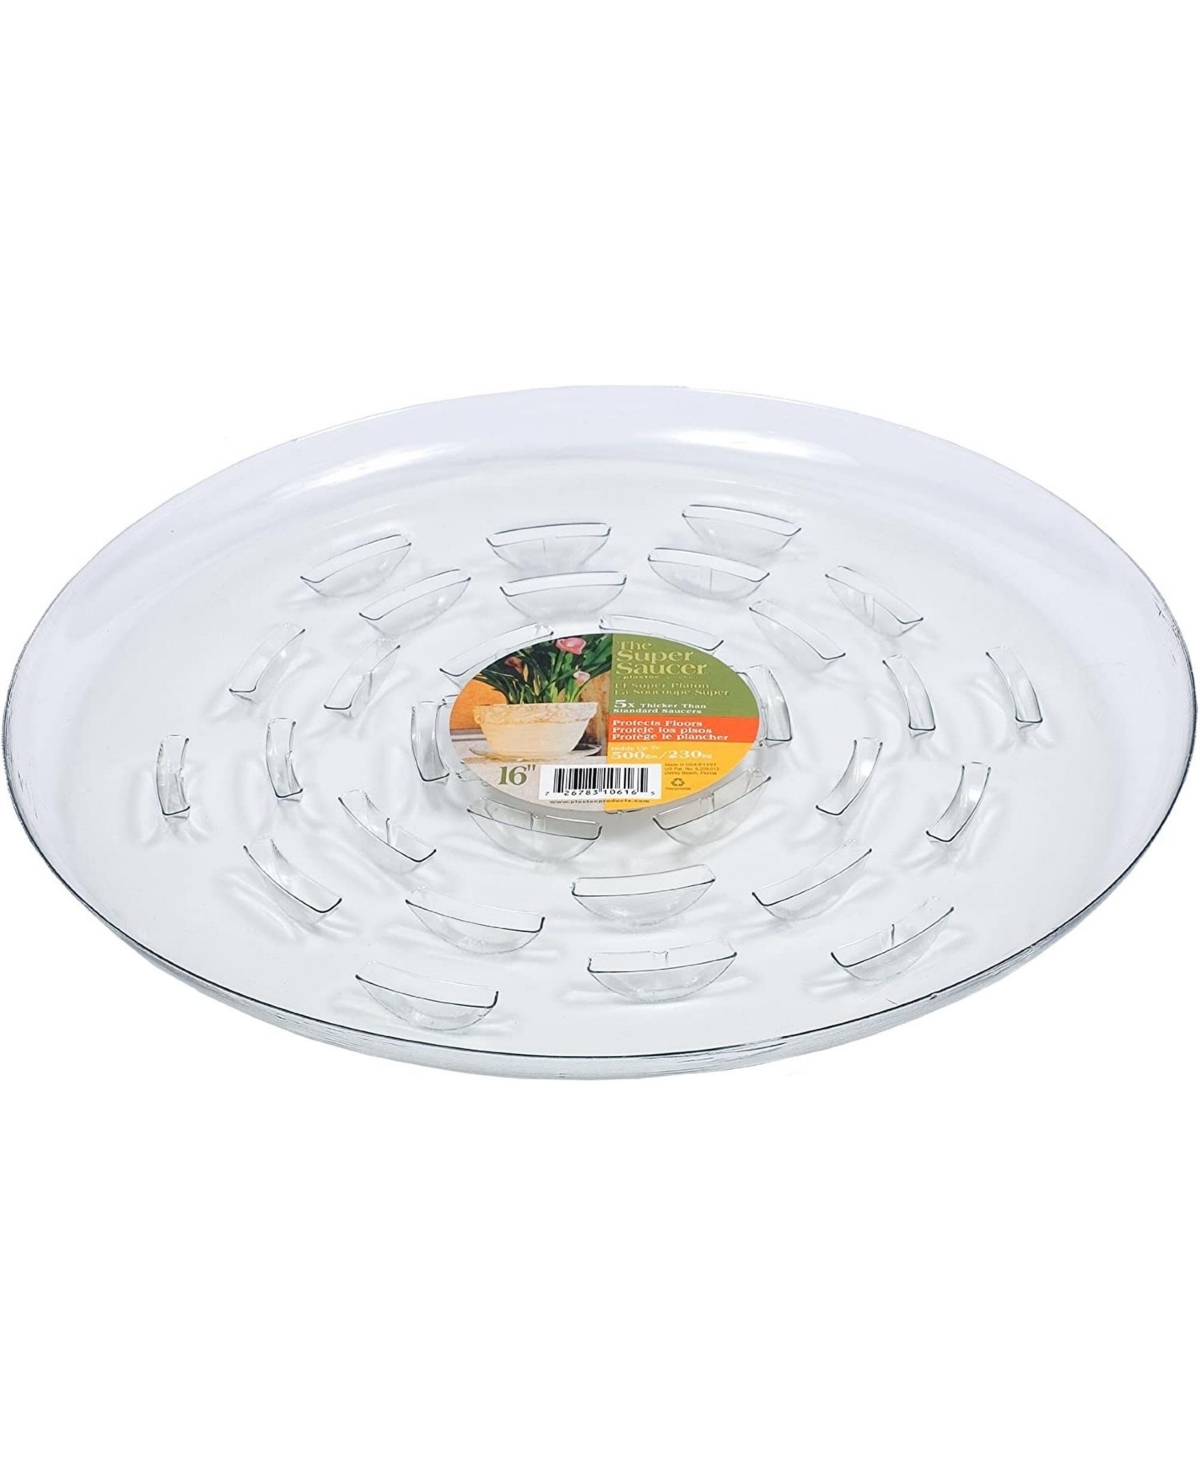 Super Plant Saucer, Clear Plastic, 16in D